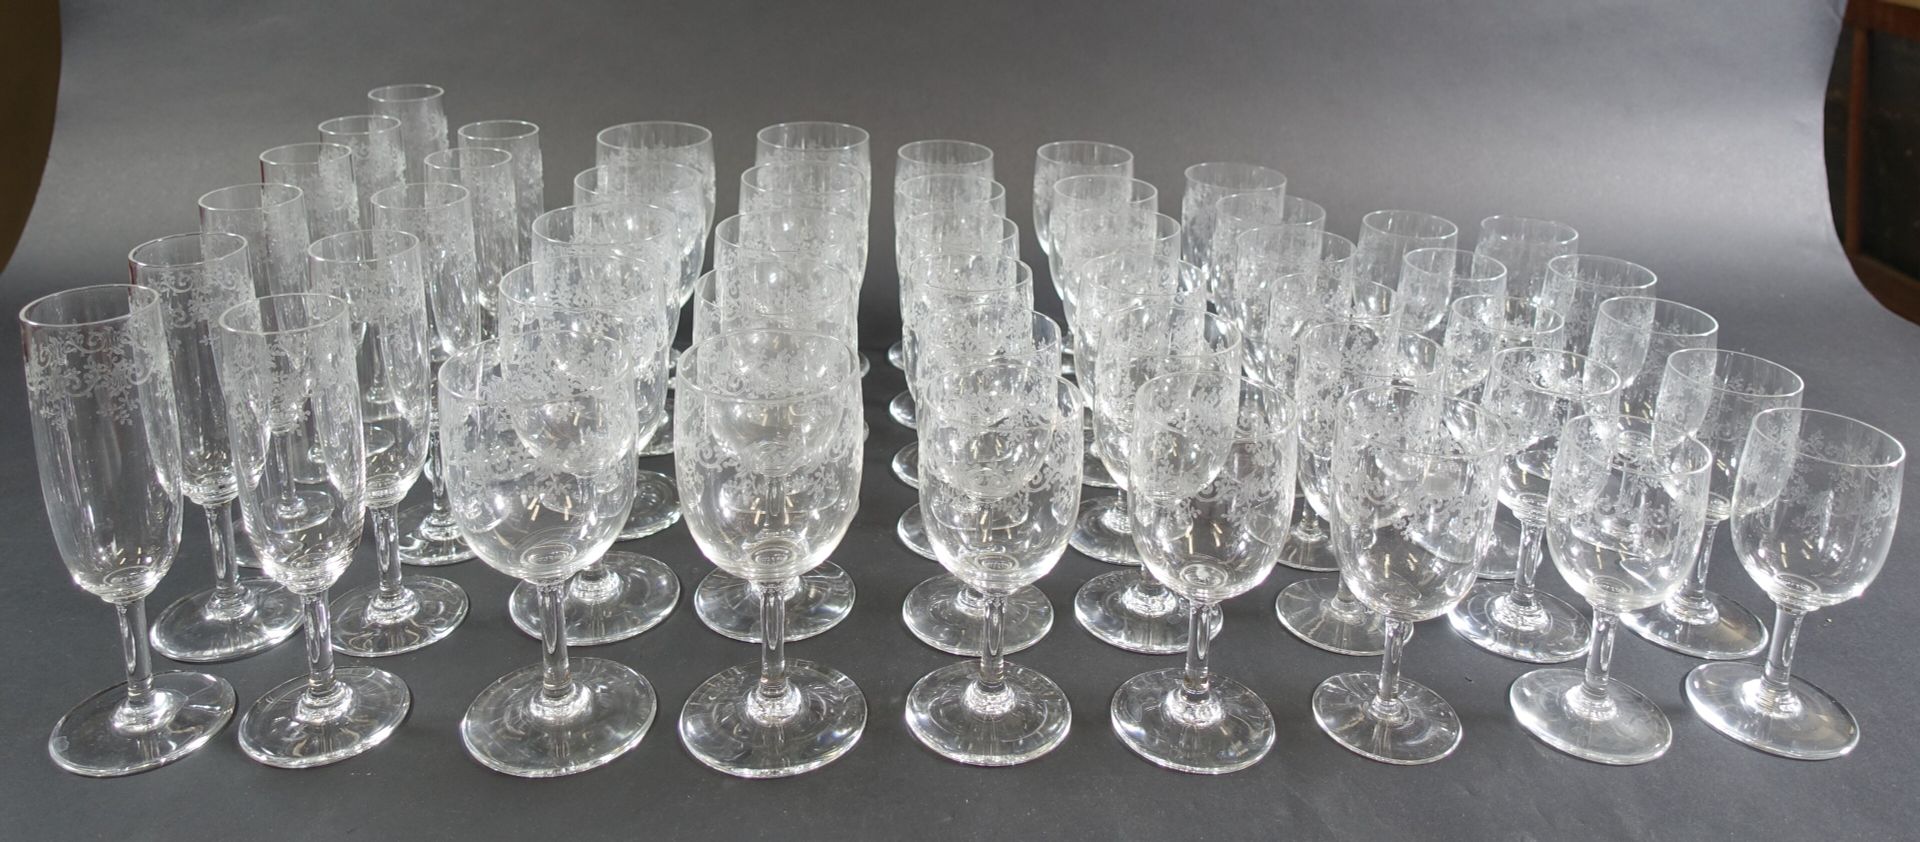 Null BACCARAT : Service of footed glasses model "Sévigné" in engraved crystal in&hellip;